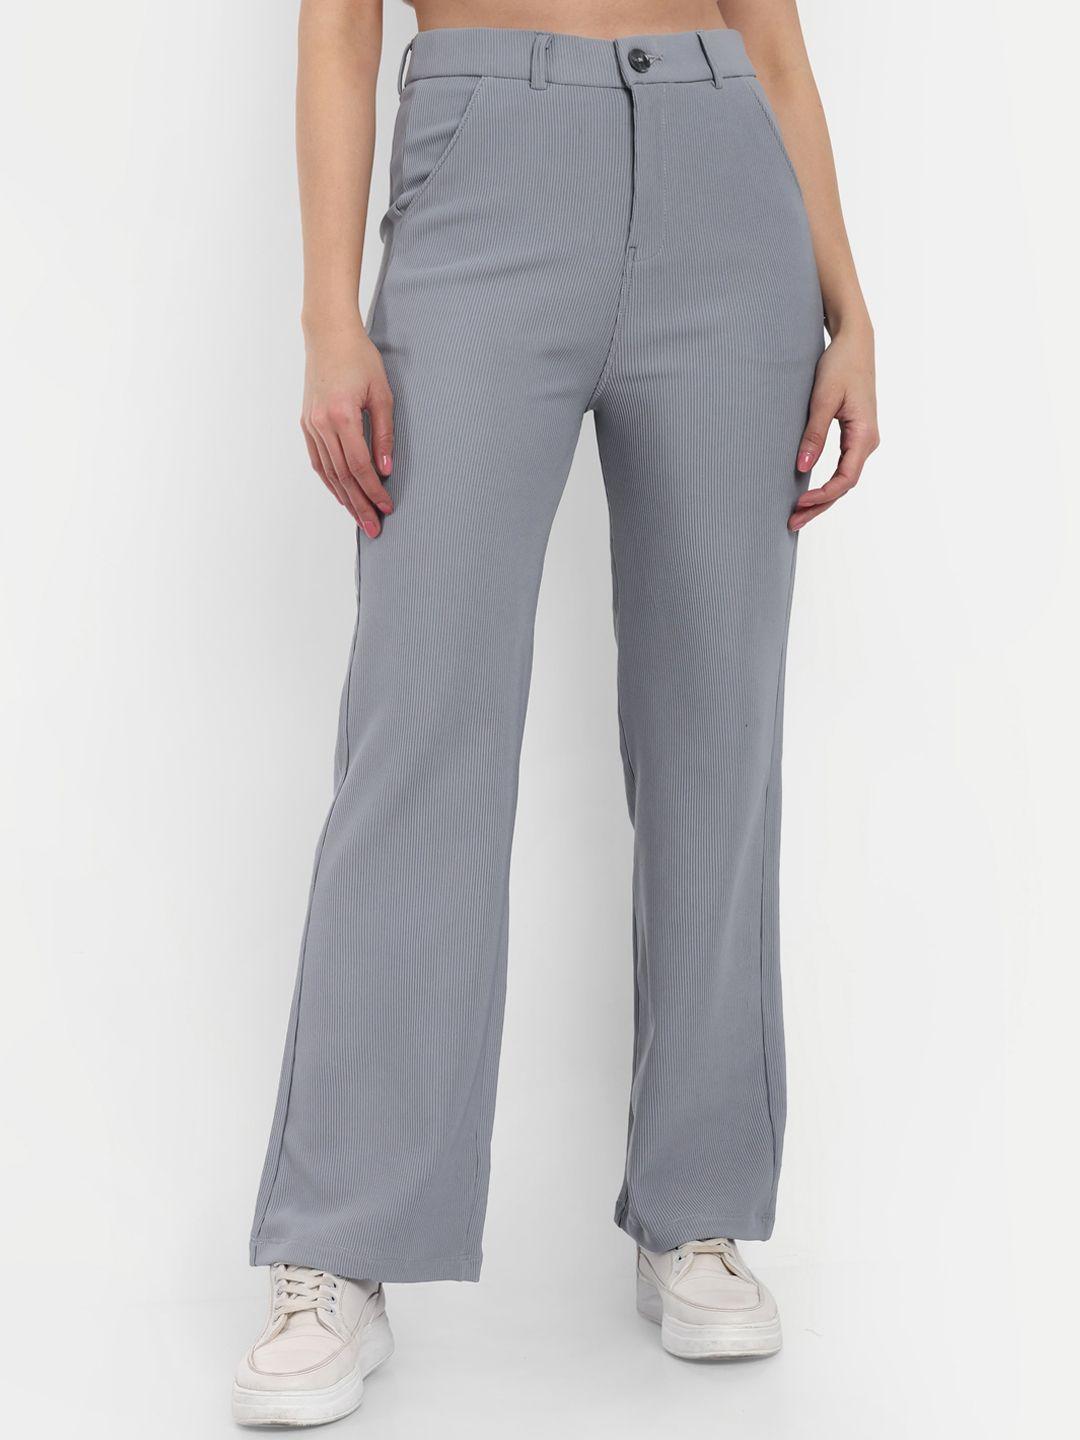 next-one-women-smart-straight-fit-high-rise-easy-wash-corduroy-trousers